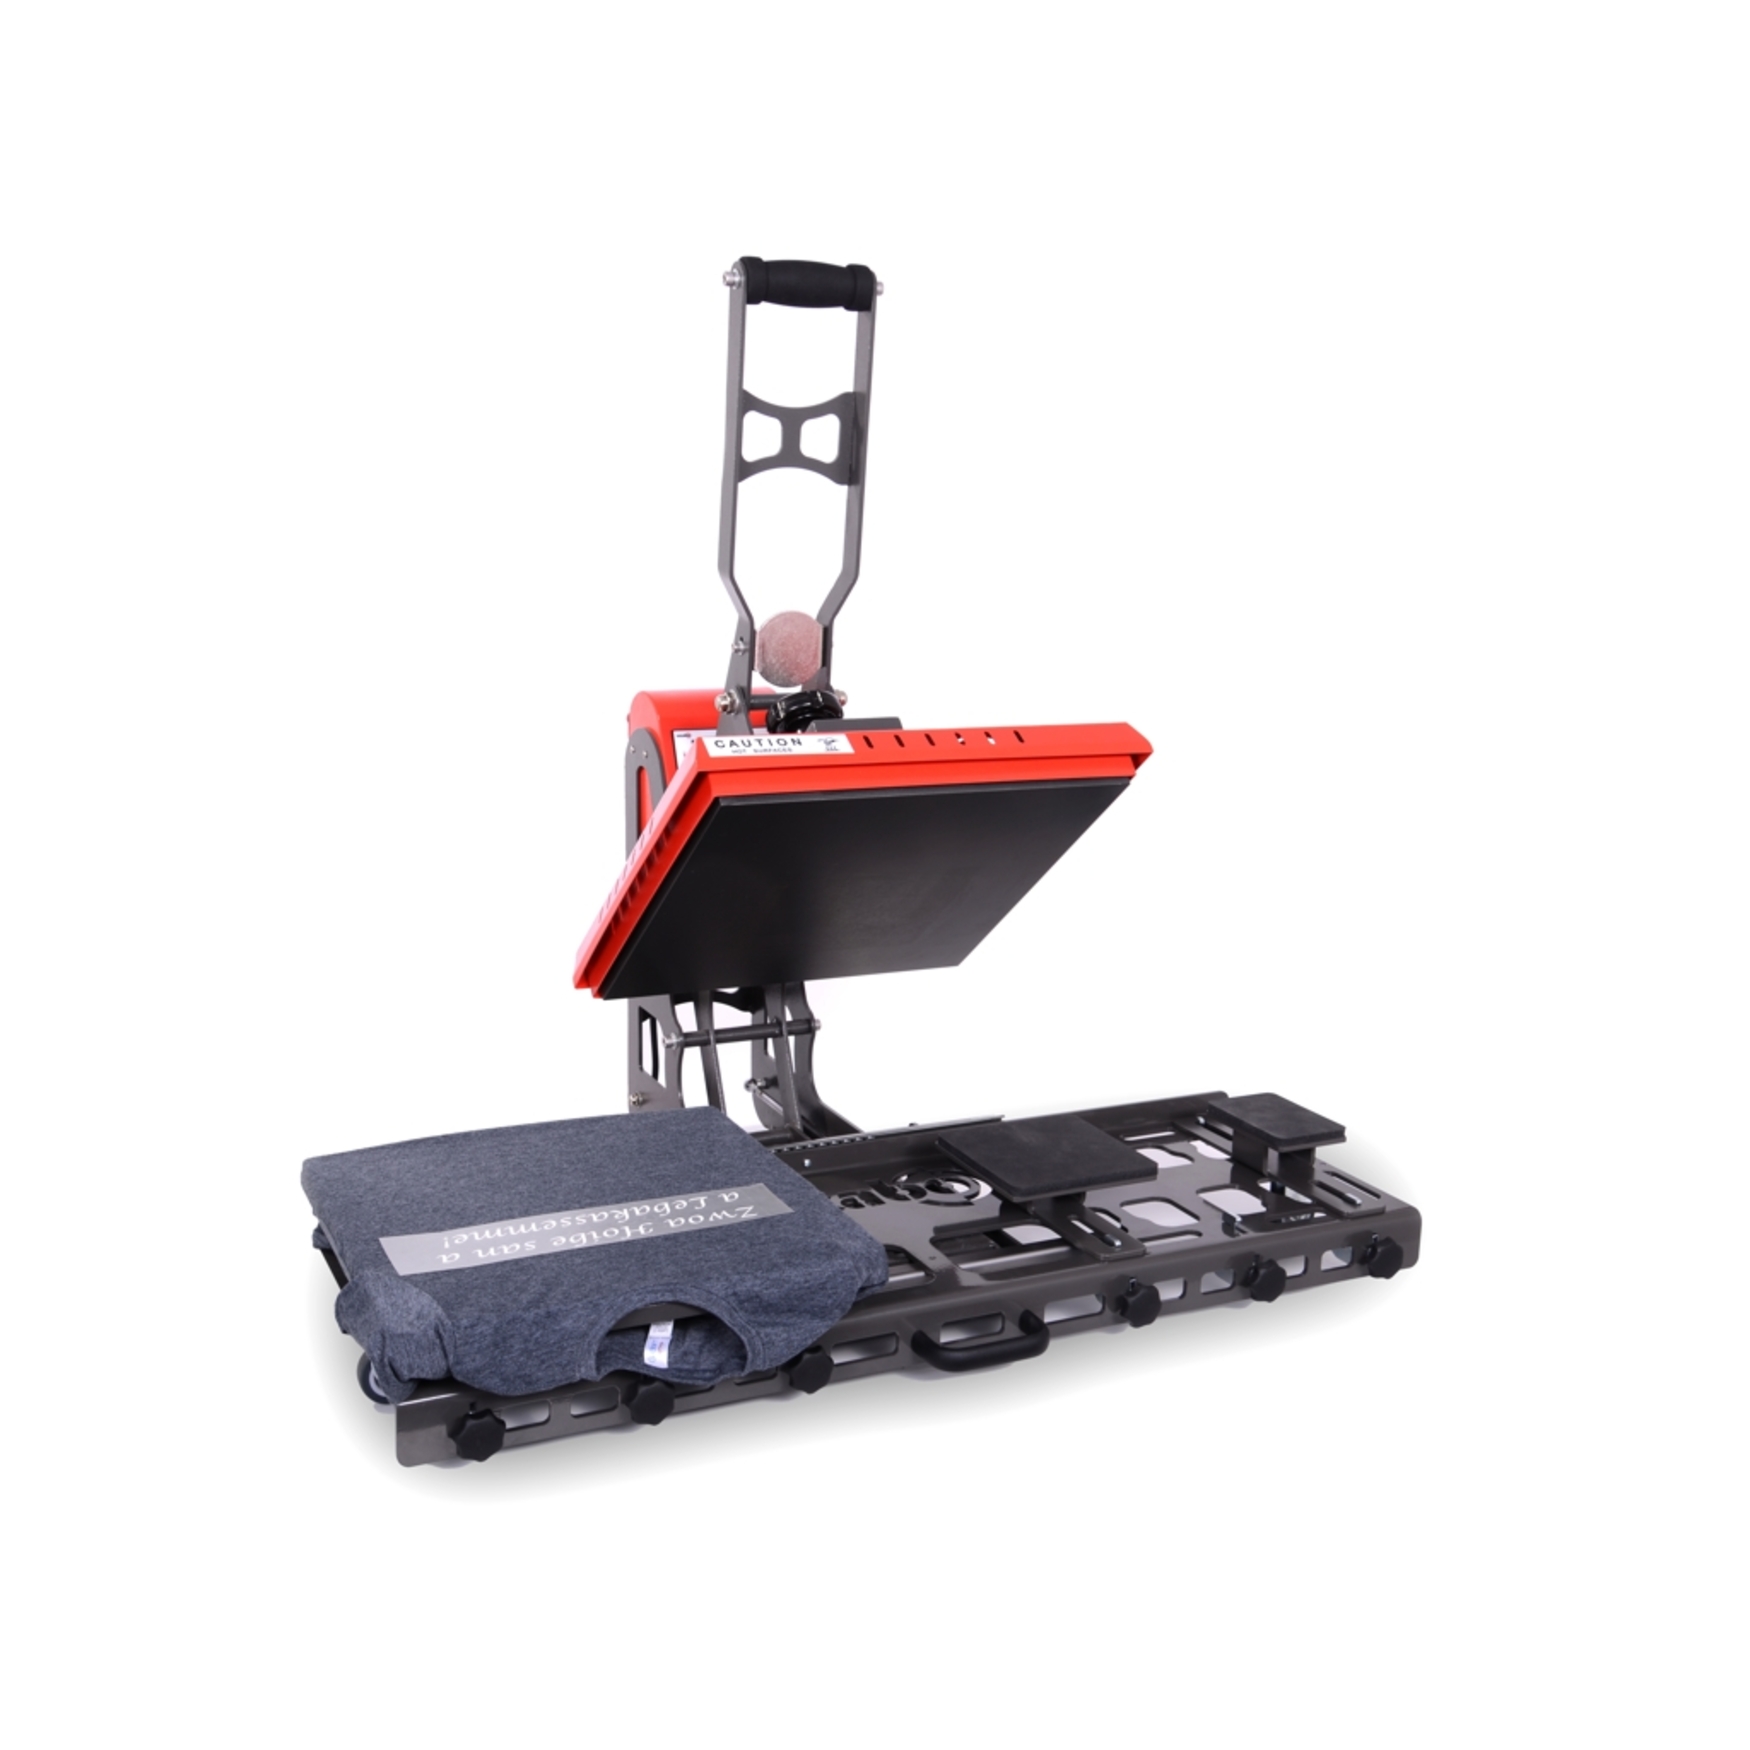 Secabo slide extension for LITE and SMART series incl. 40x50cm base plate with beam adapter